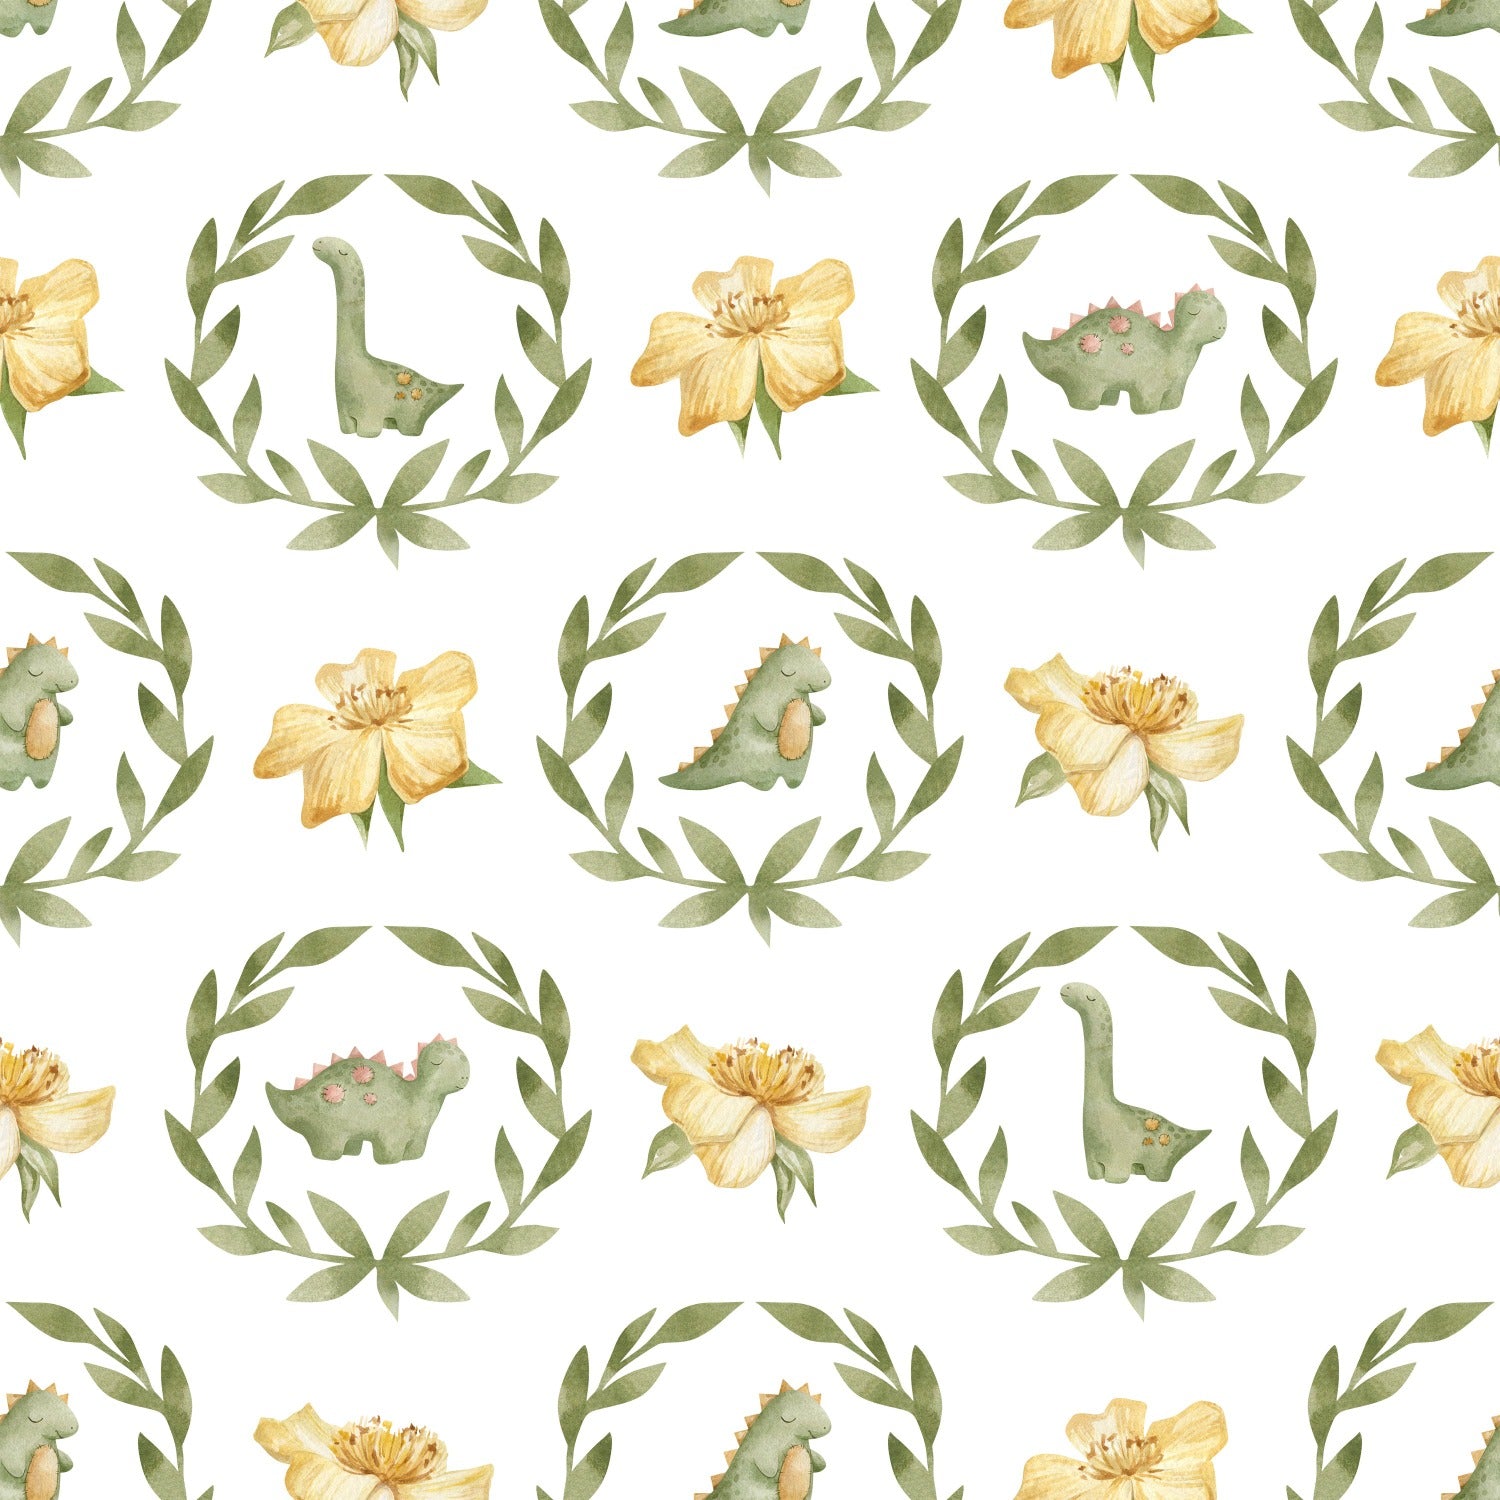 Seamless pattern of baby dinosaurs and flowers in watercolor style for nursery wallpaper.